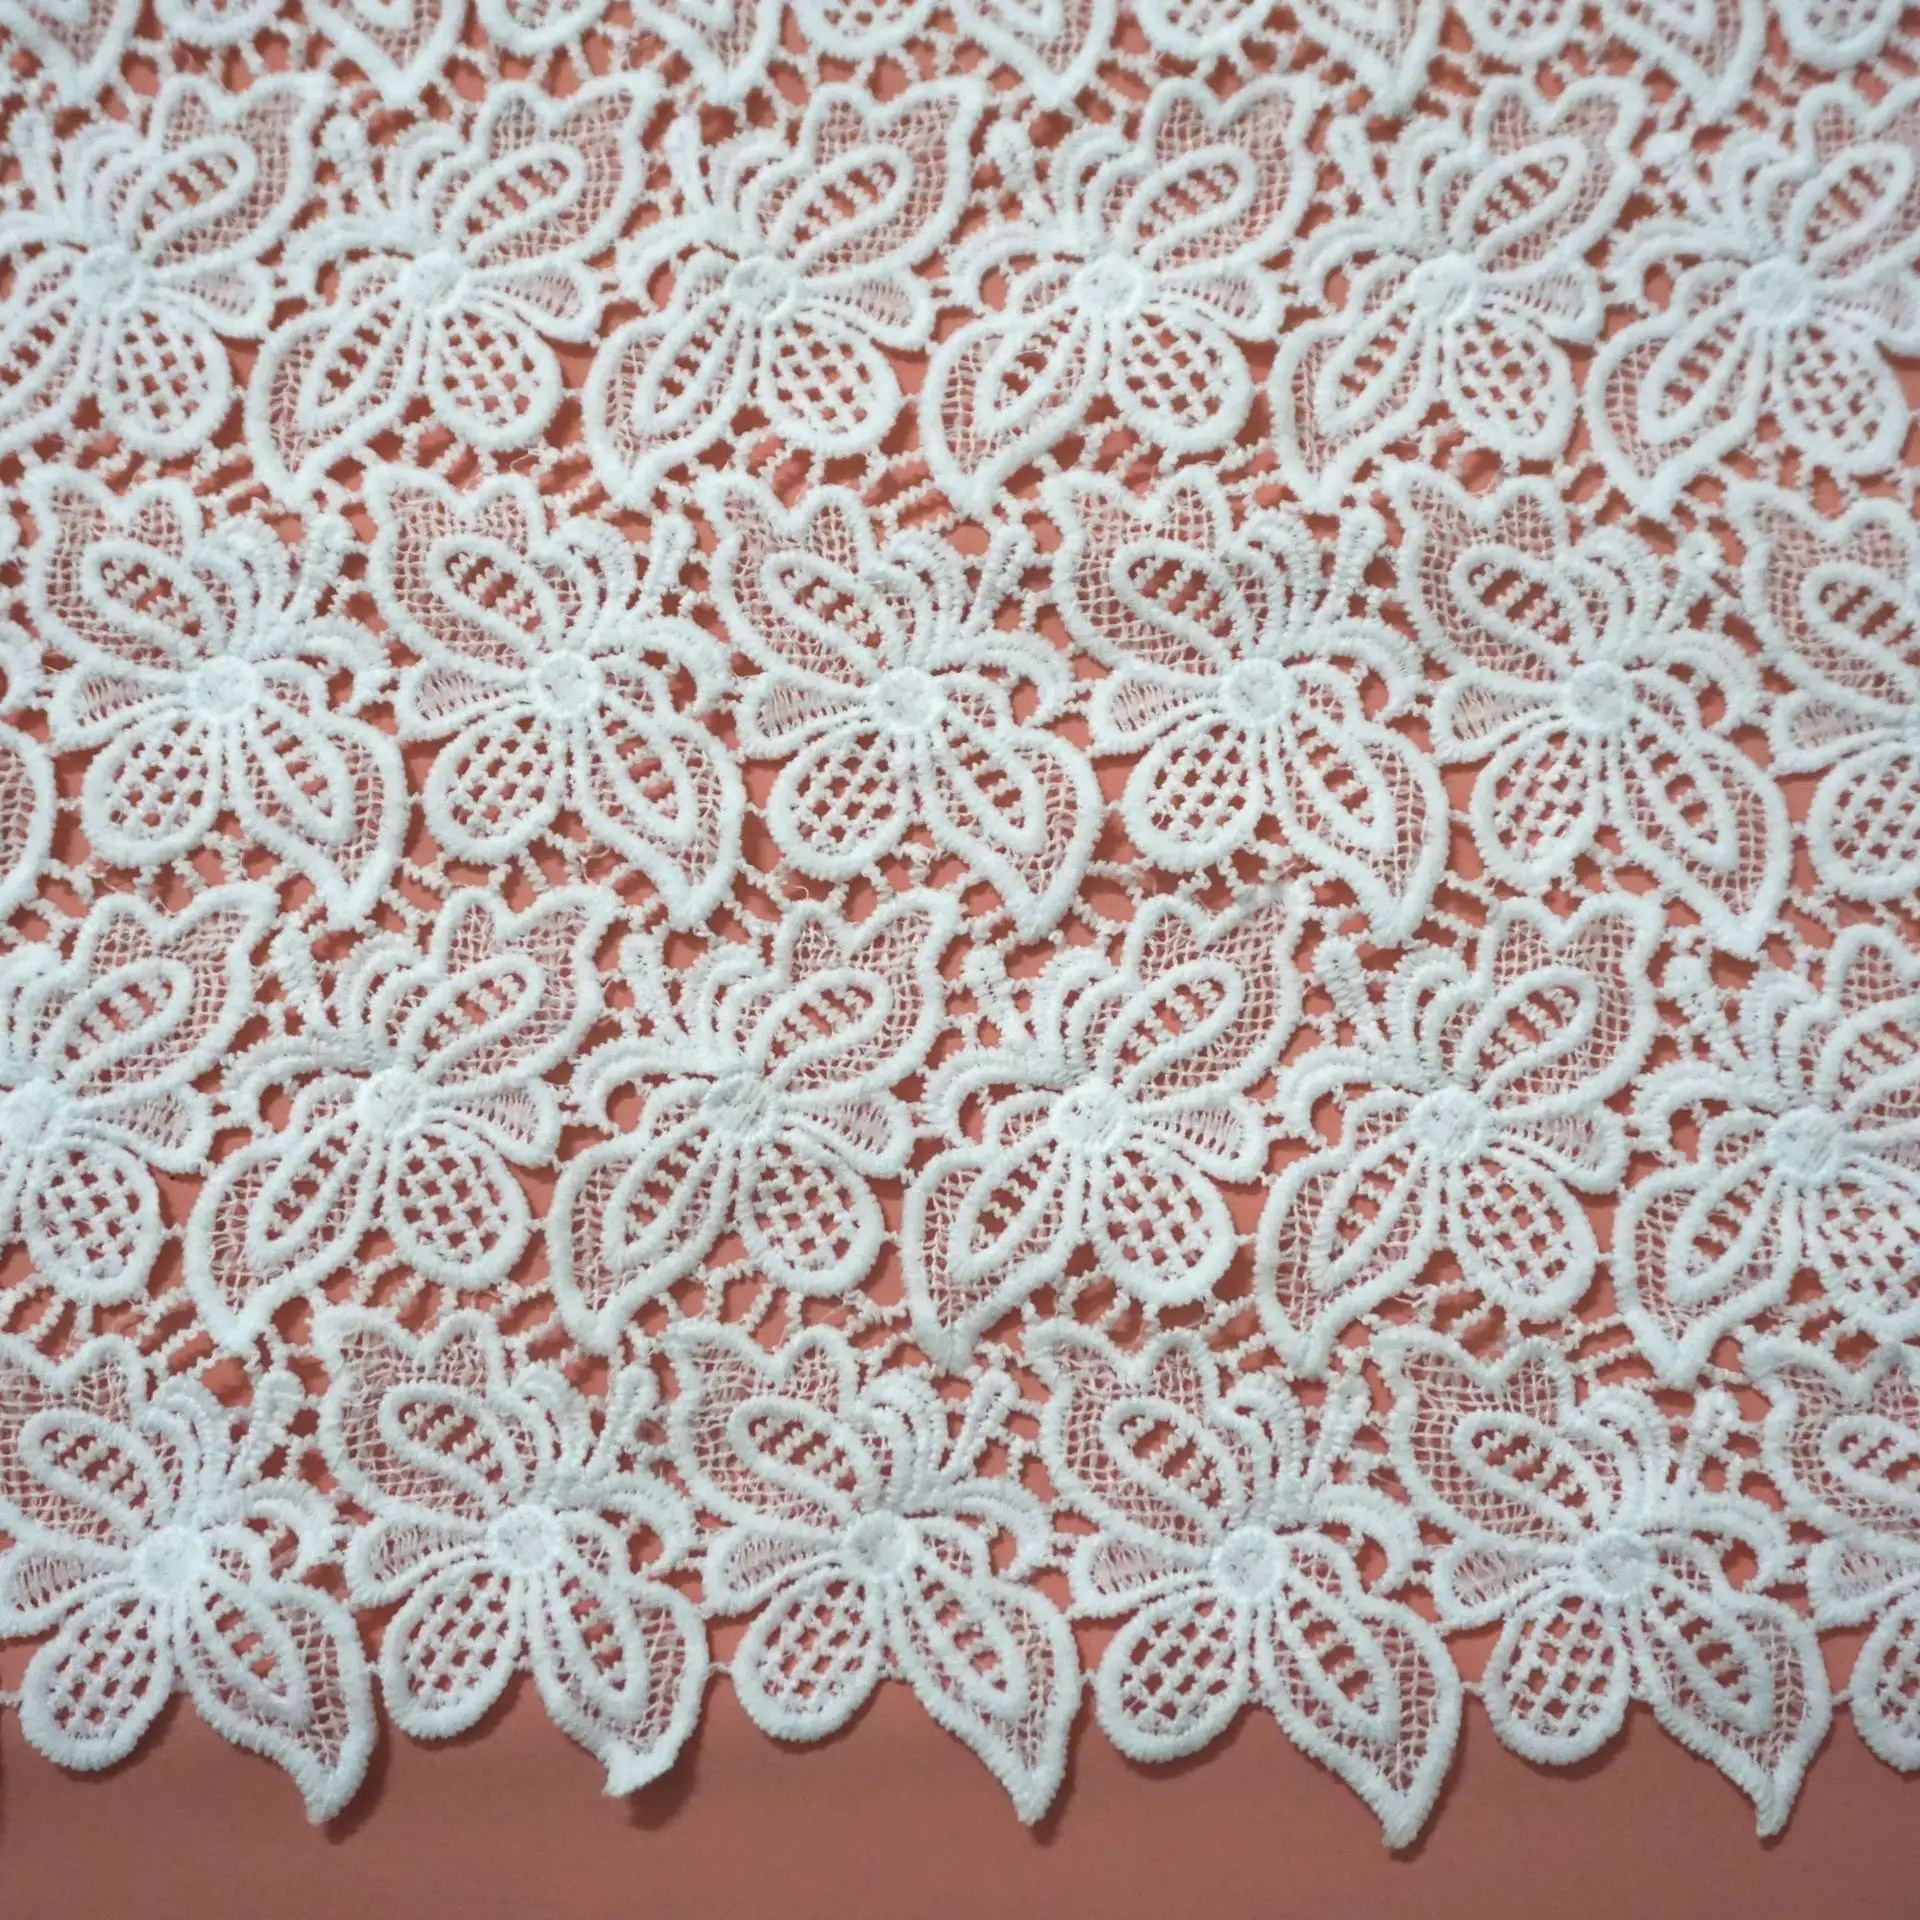 Butterfly Milk Silk Computer Embroidery Fabric Full Lace Garment Material with Hollow Embroidery Premium Lace Fabric